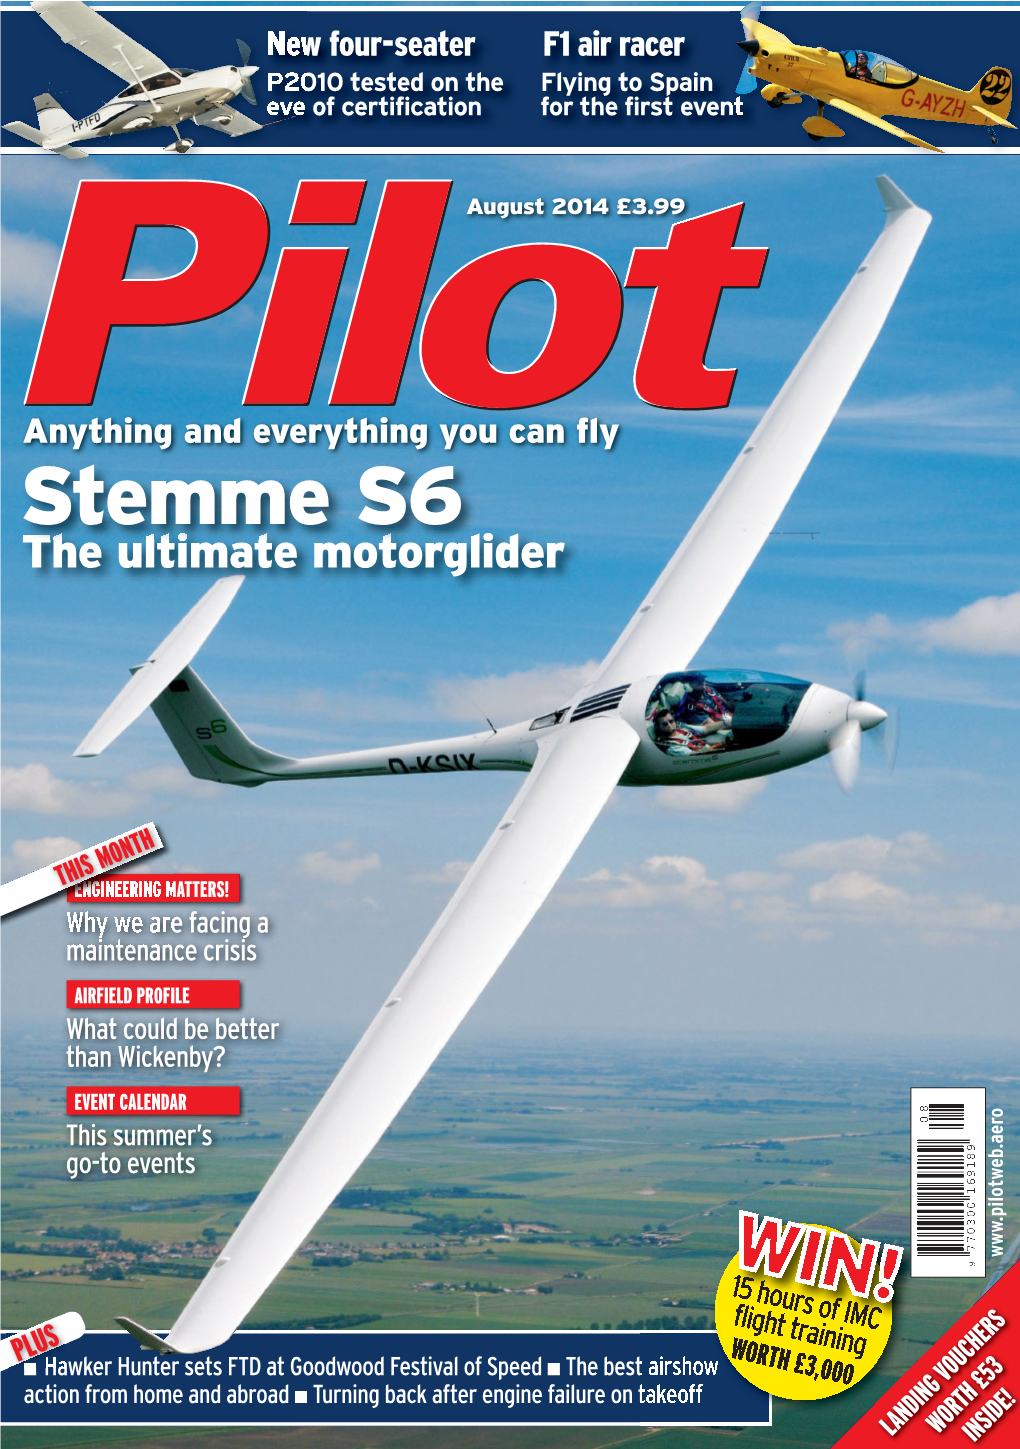 Stemme S6 the Ultimate Motorglider